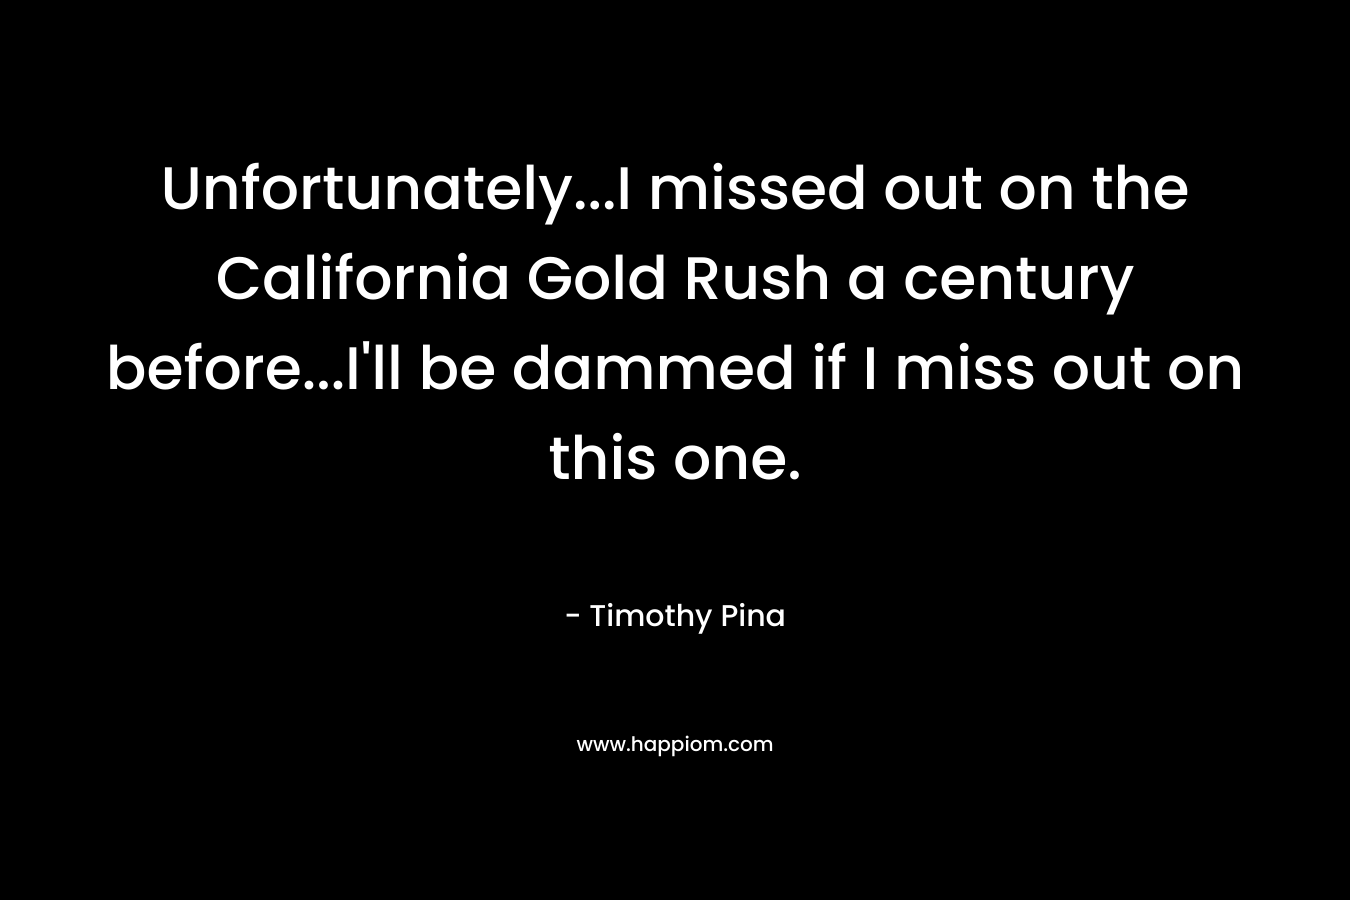 Unfortunately...I missed out on the California Gold Rush a century before...I'll be dammed if I miss out on this one.